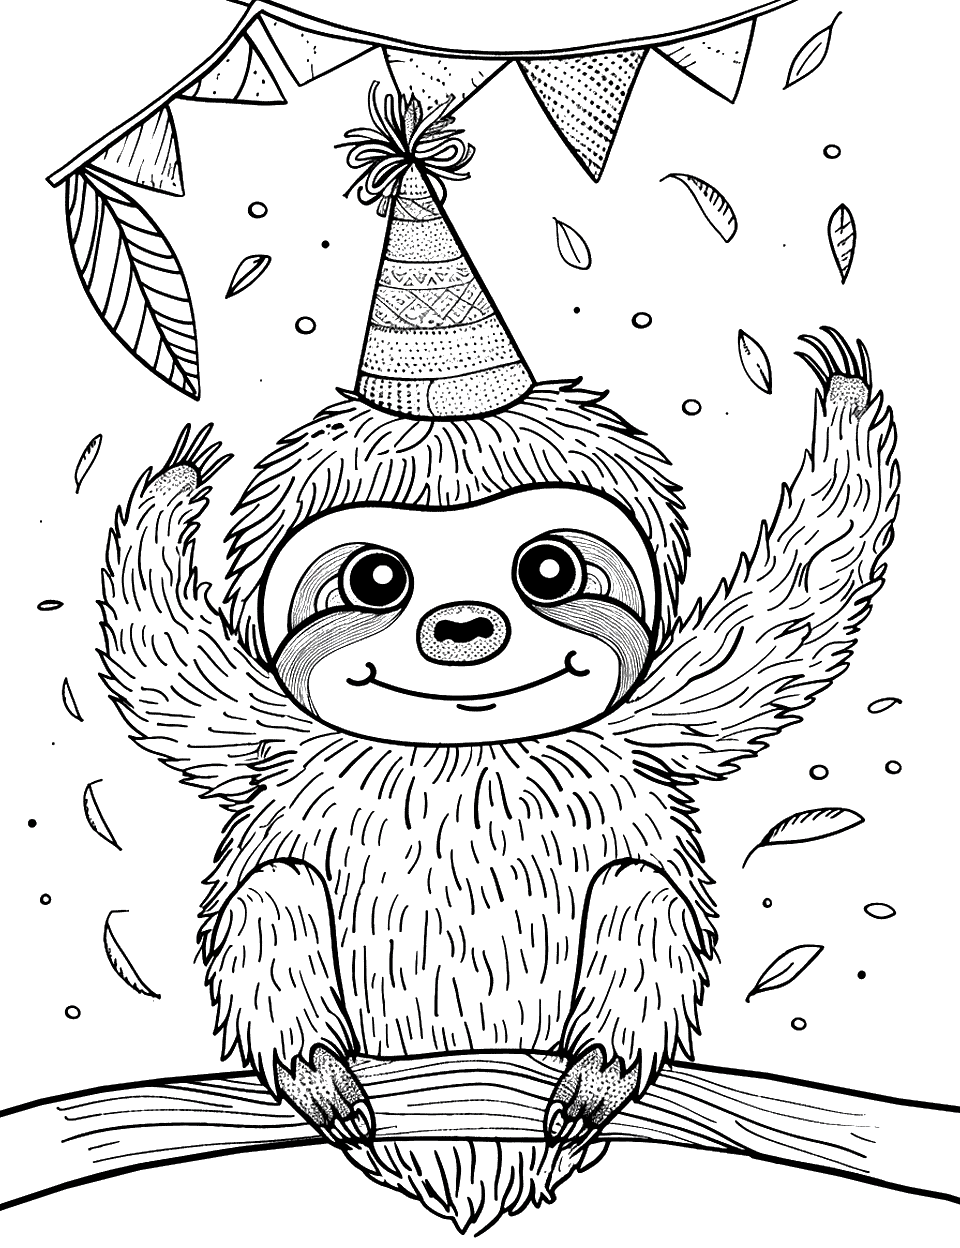 Fun Sloth in a Party Hat Coloring Page - A sloth celebrating with a colorful party hat on.